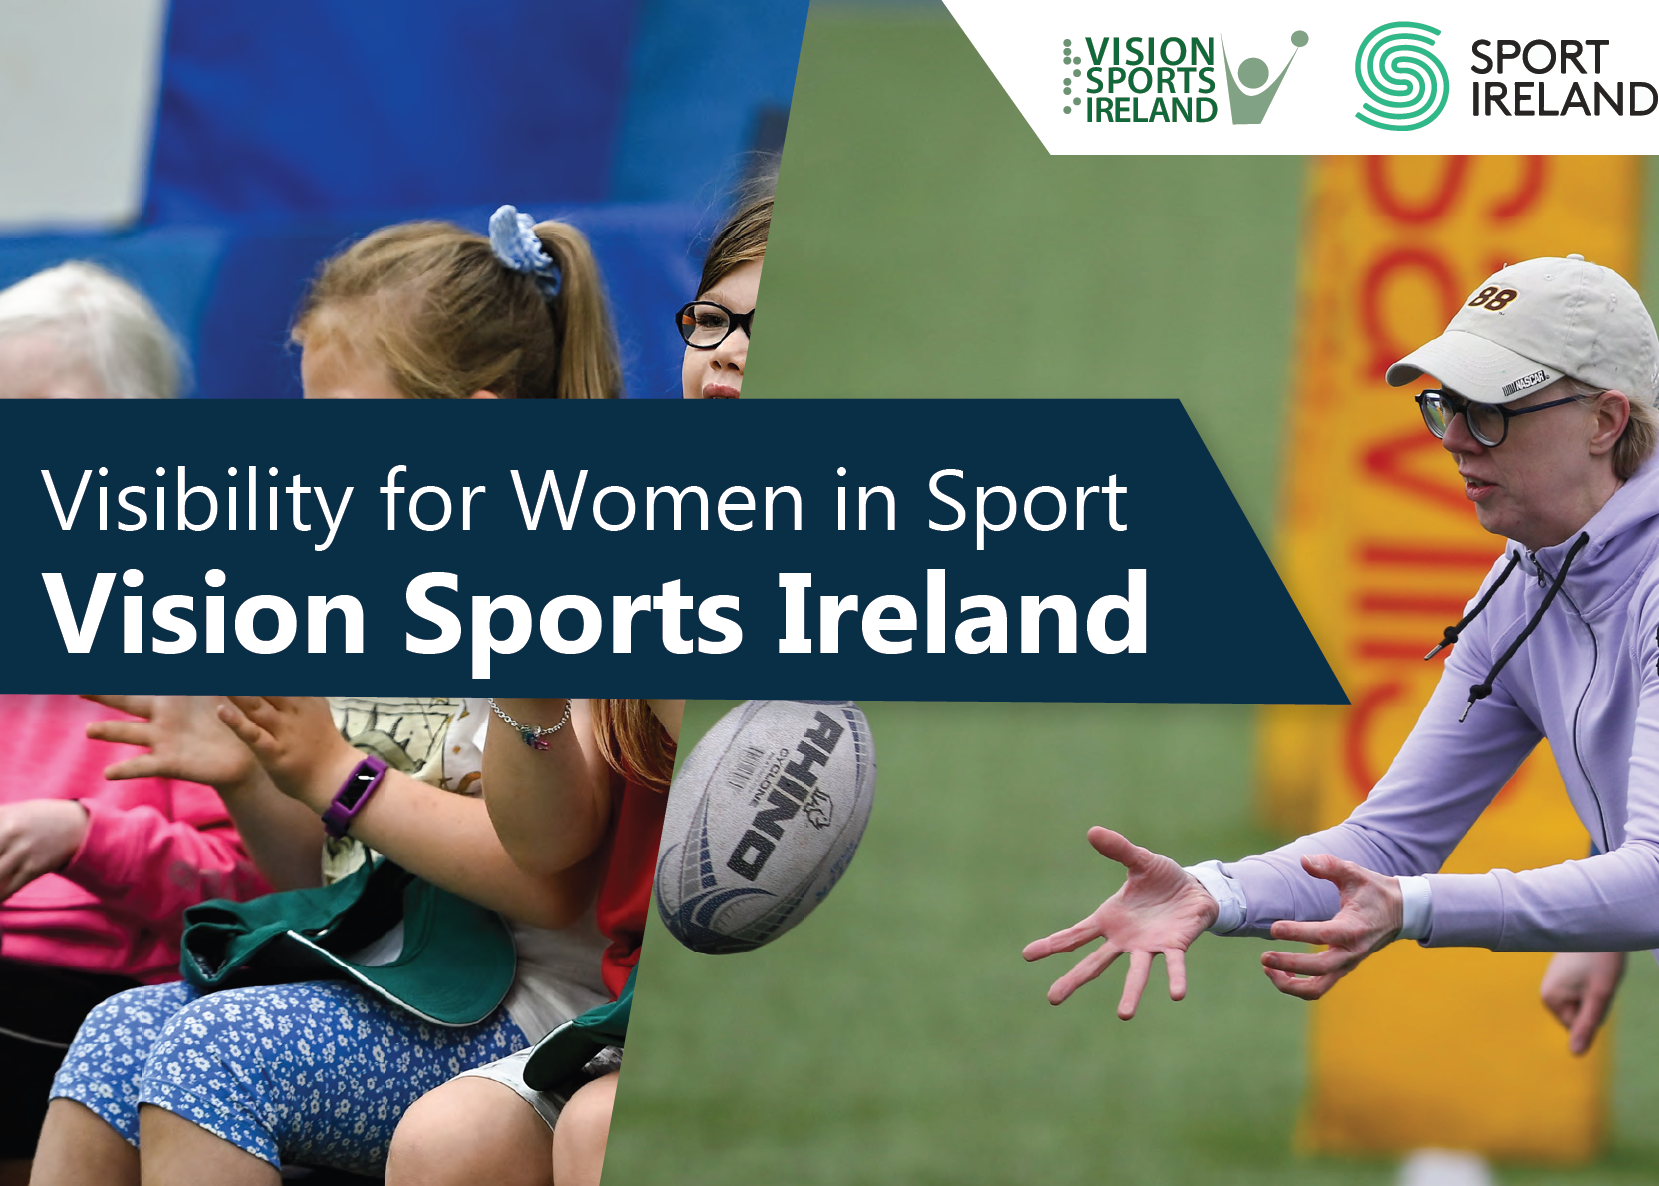 The front cover of the Visibility for Women in Sport research. The background images are of a woman playing rugby and some girls laughing. The text reads 